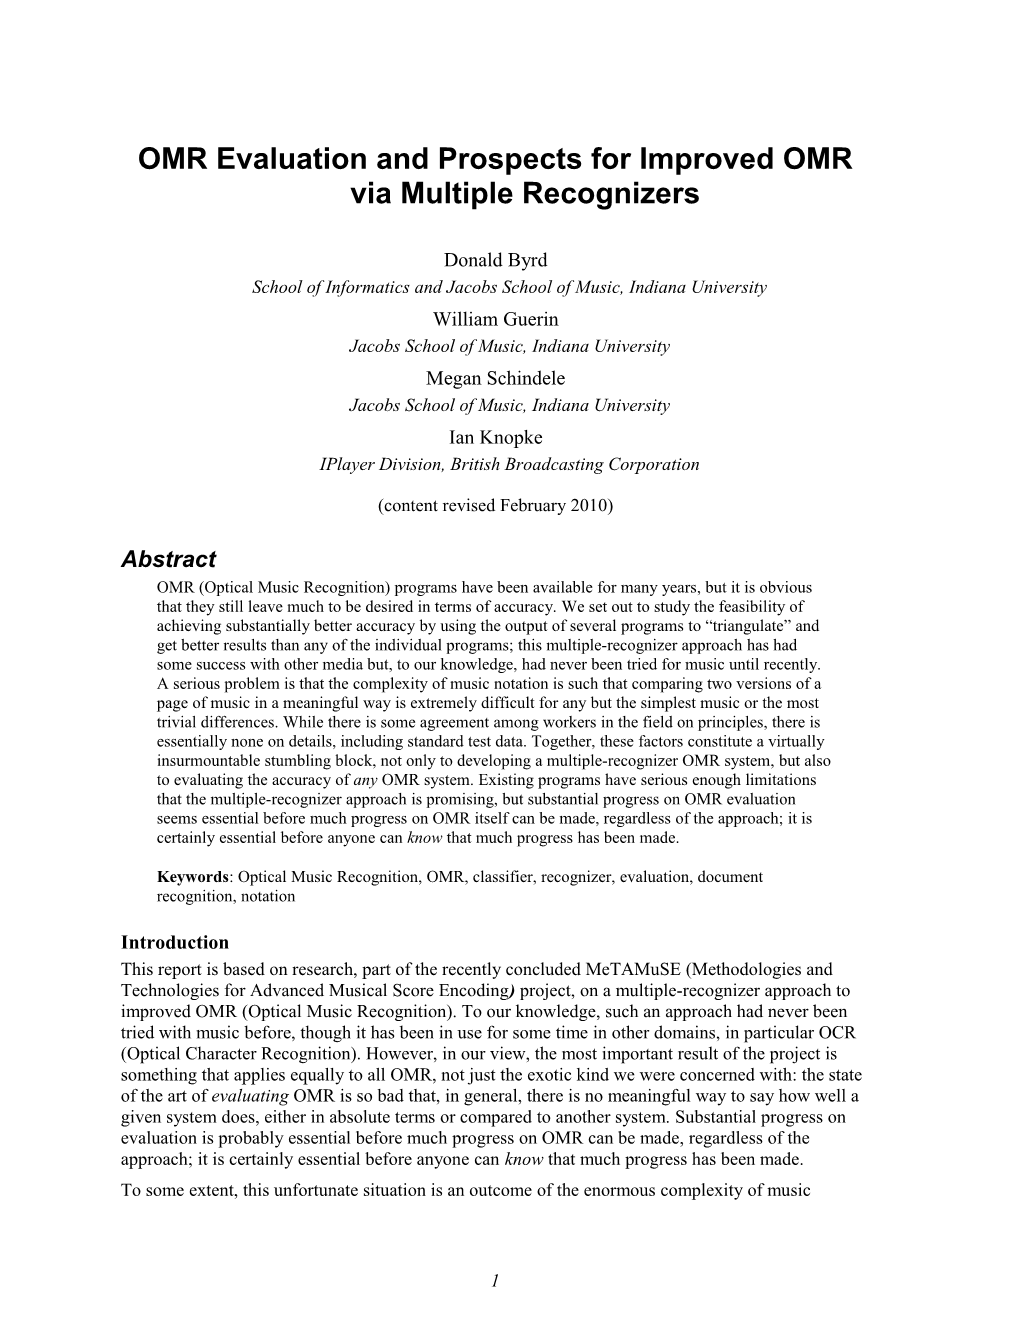 OMR Evaluation and Prospects for Improved OMR Via Multiple Recognizers